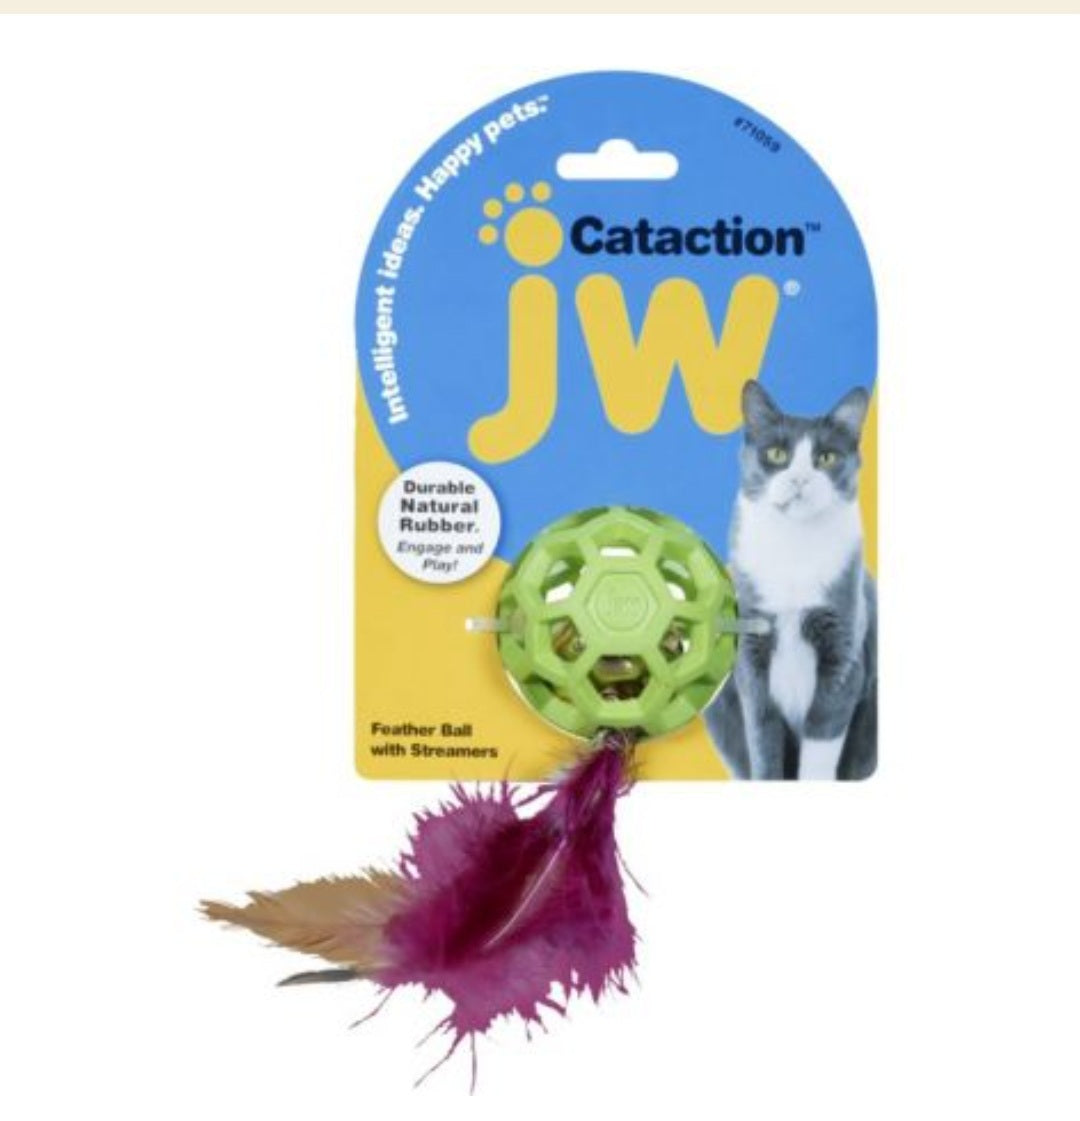 JW Cataction Feather Ball Toy with Bell - Hillbilly House Panthers